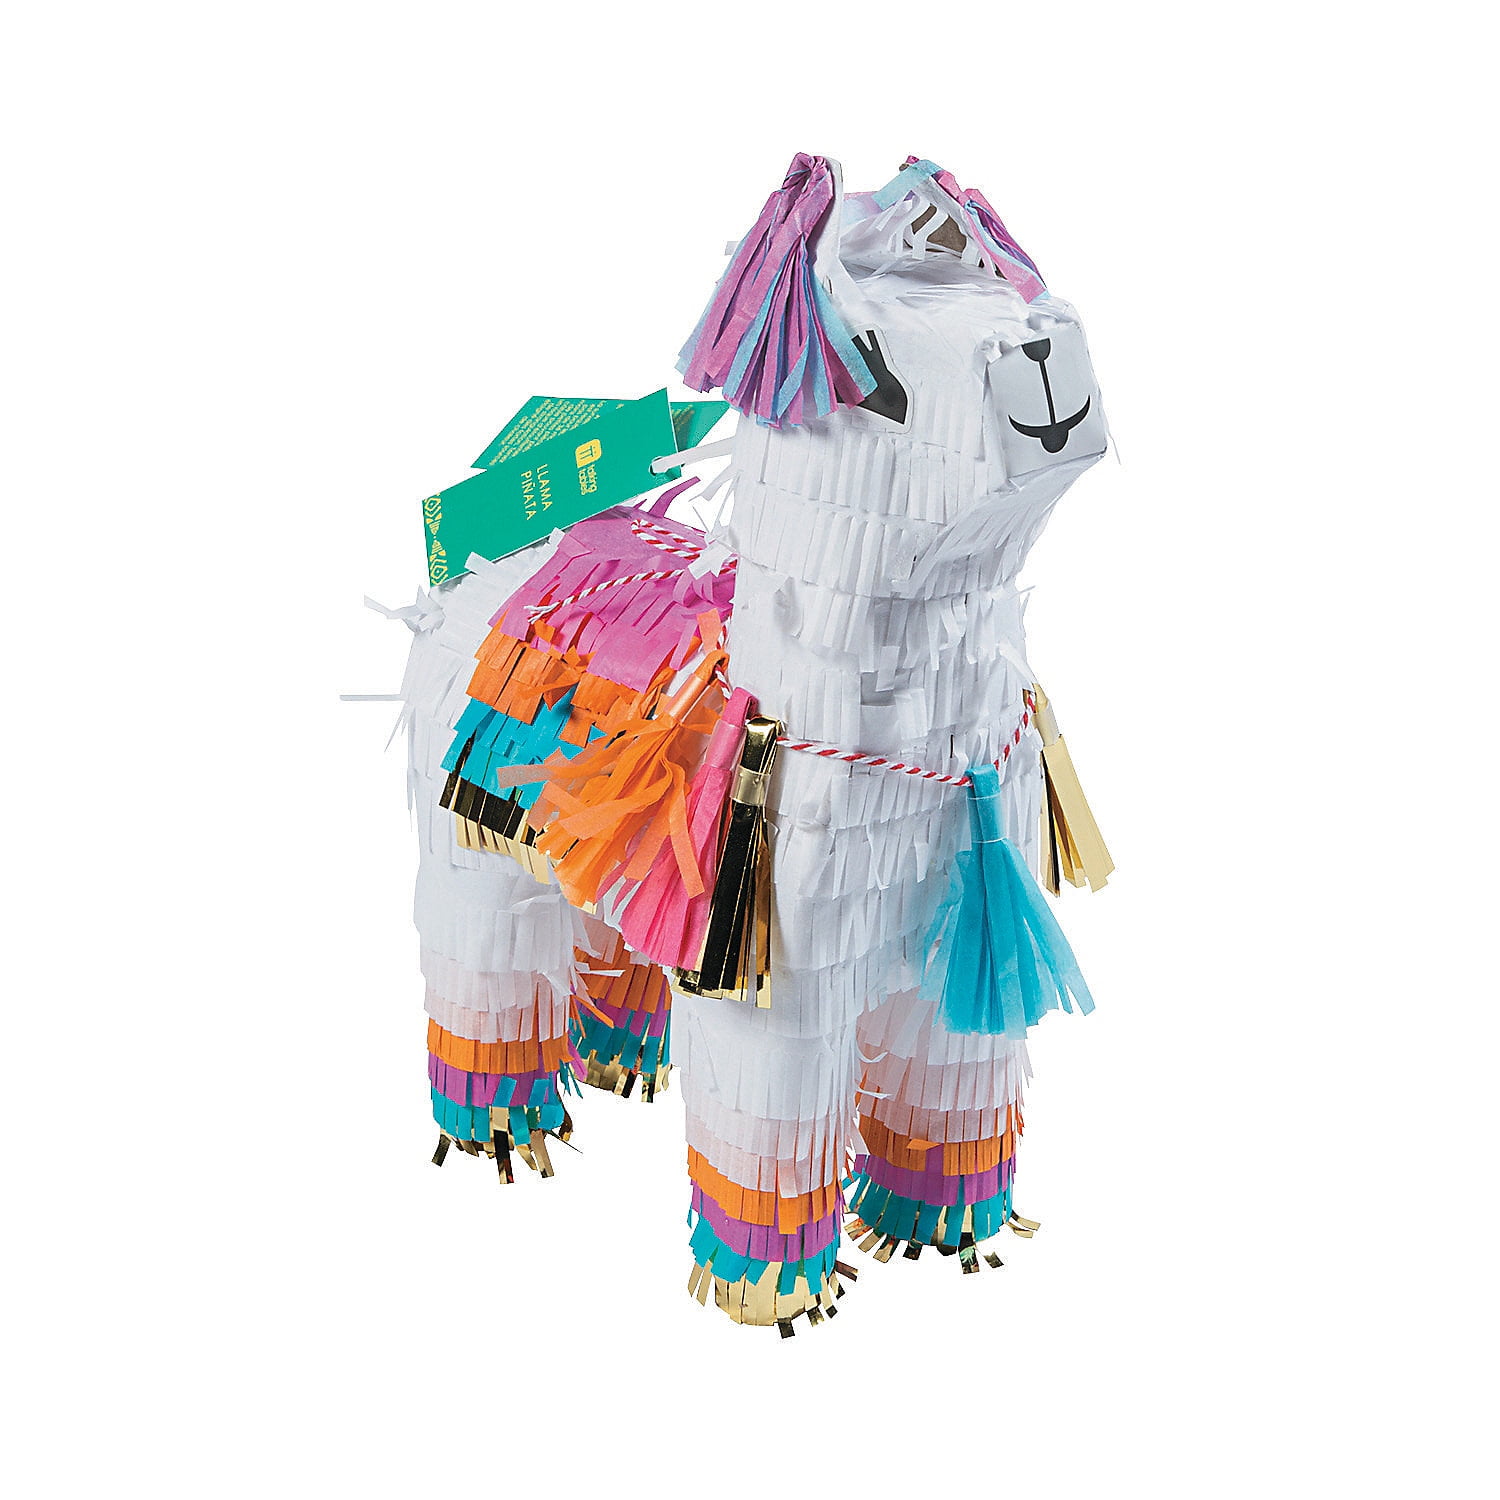 Cinco de Mayo Party Fiesta Mini Details about   3-Pack Miniature Llama Pinatas for Birthday 